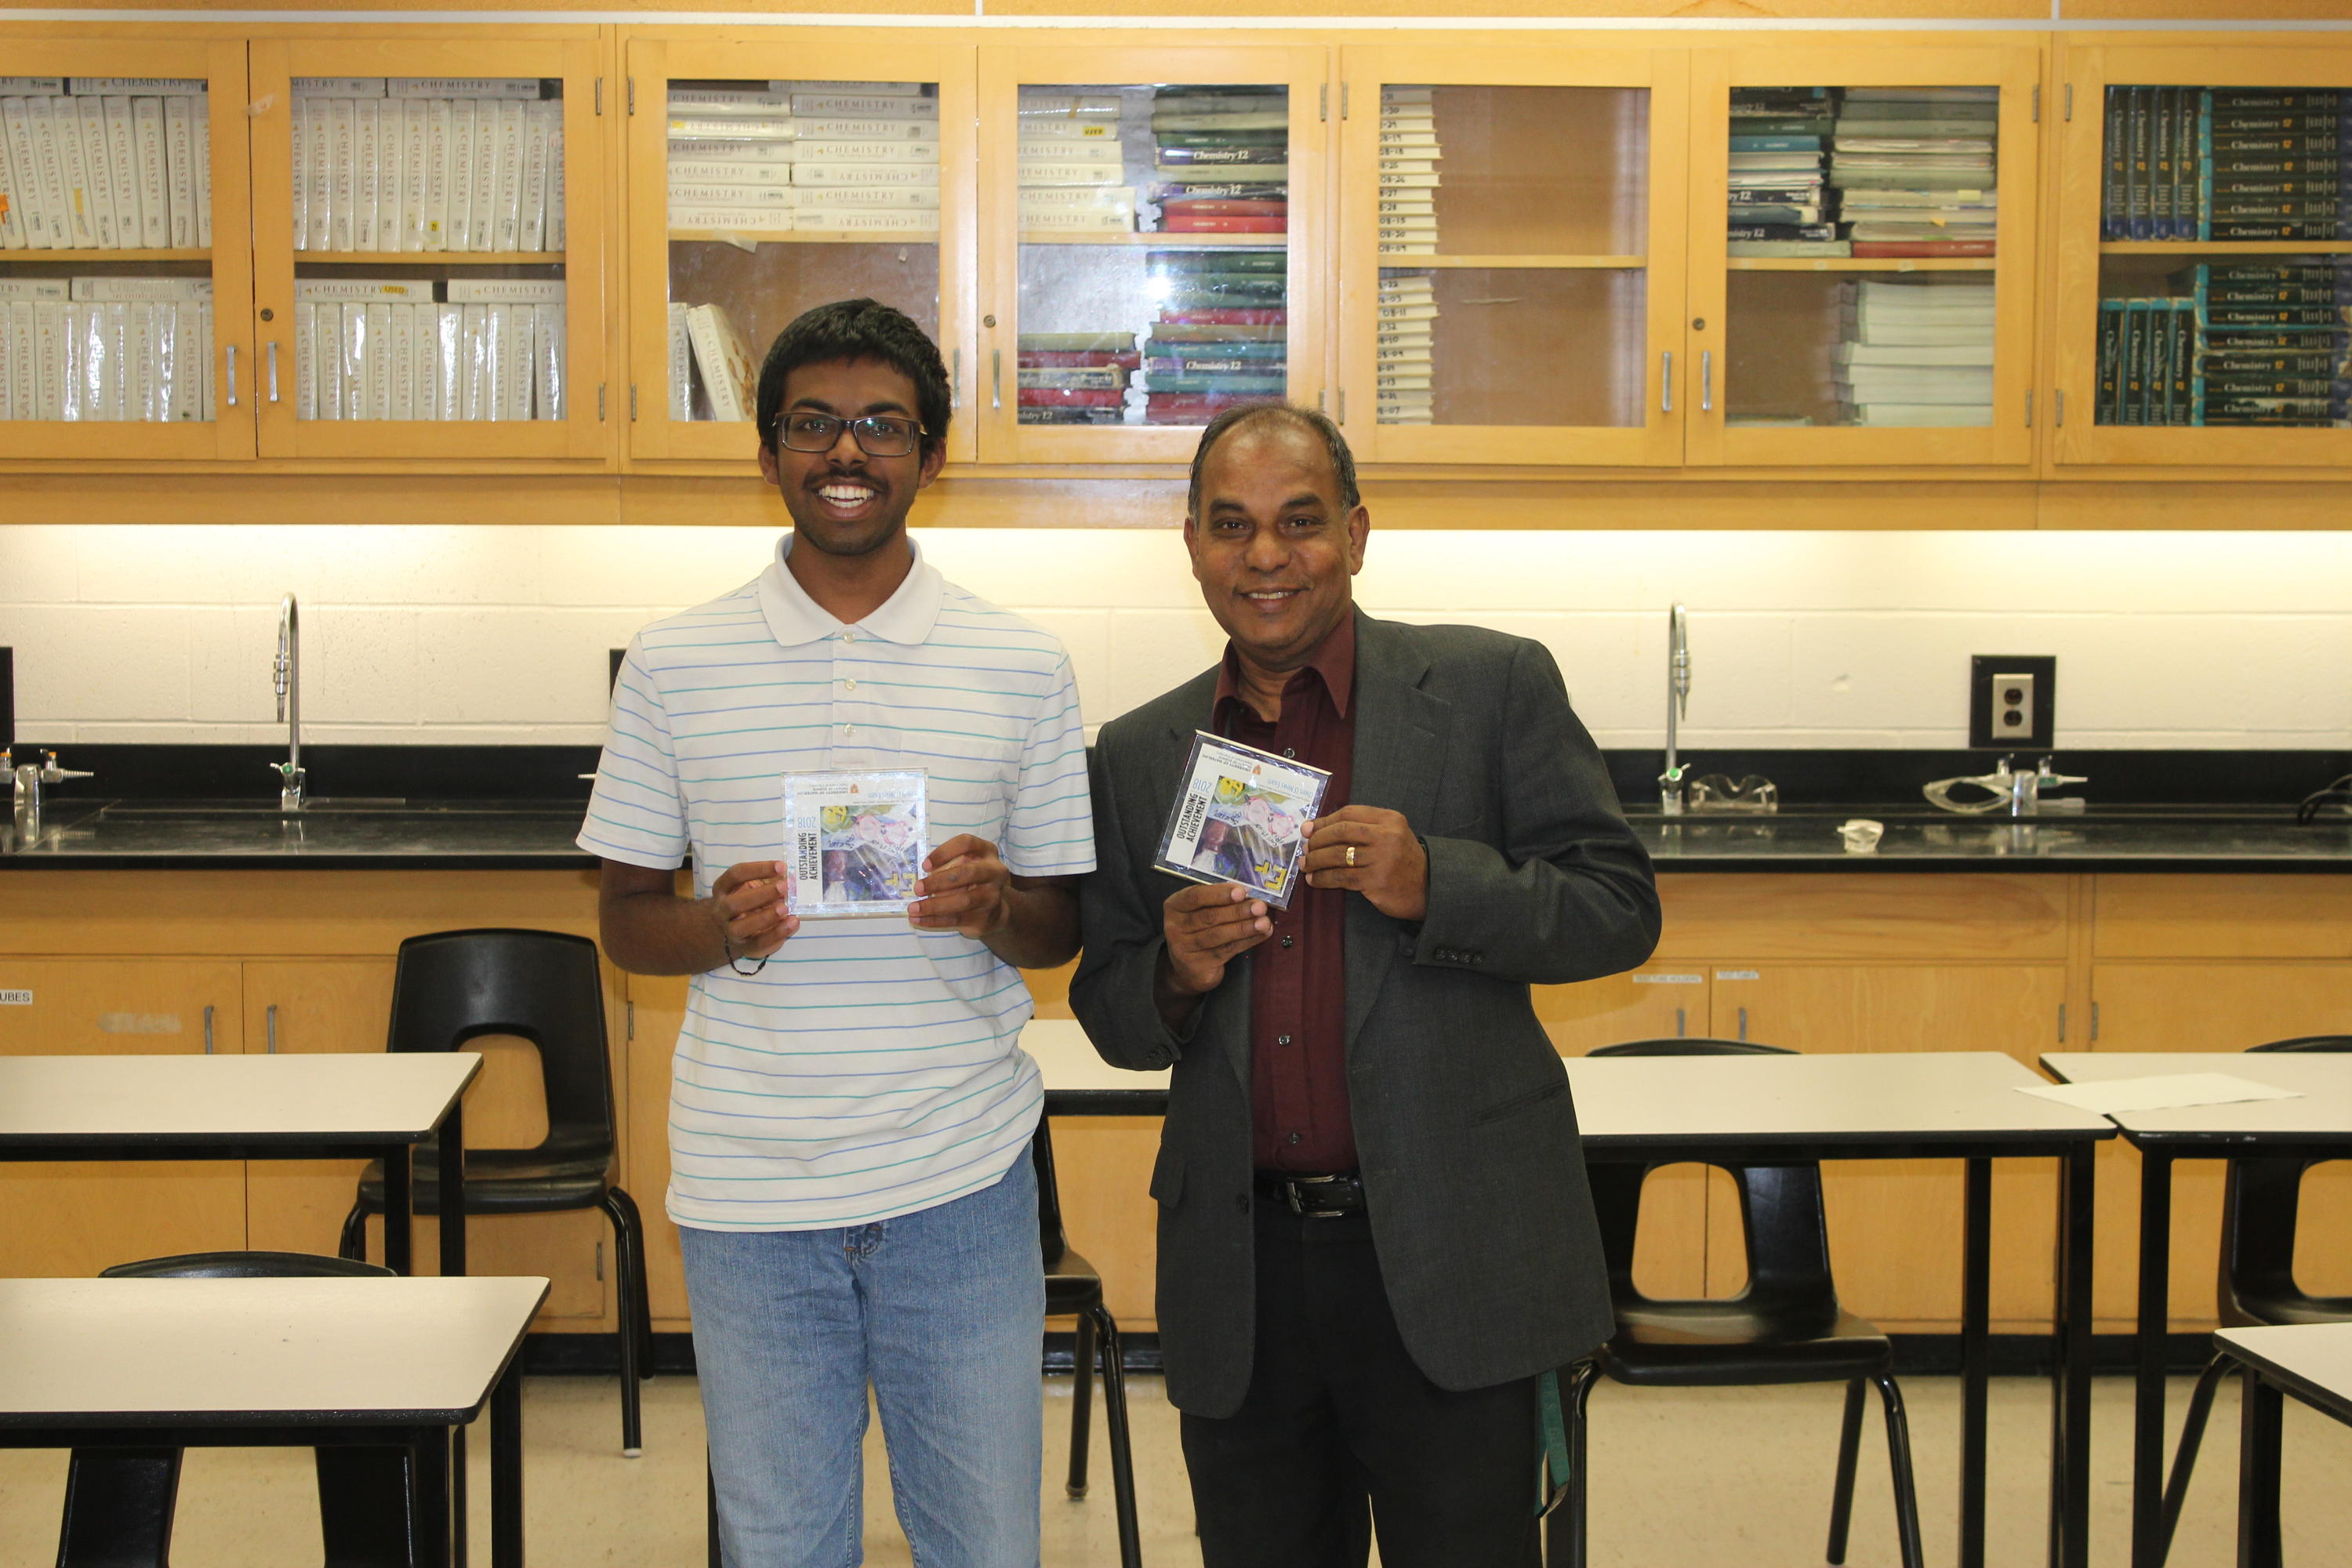 Student Yashan Chelliahpilla and his teacher Samuel Dijohn holding winning tiles in a chemistry lab